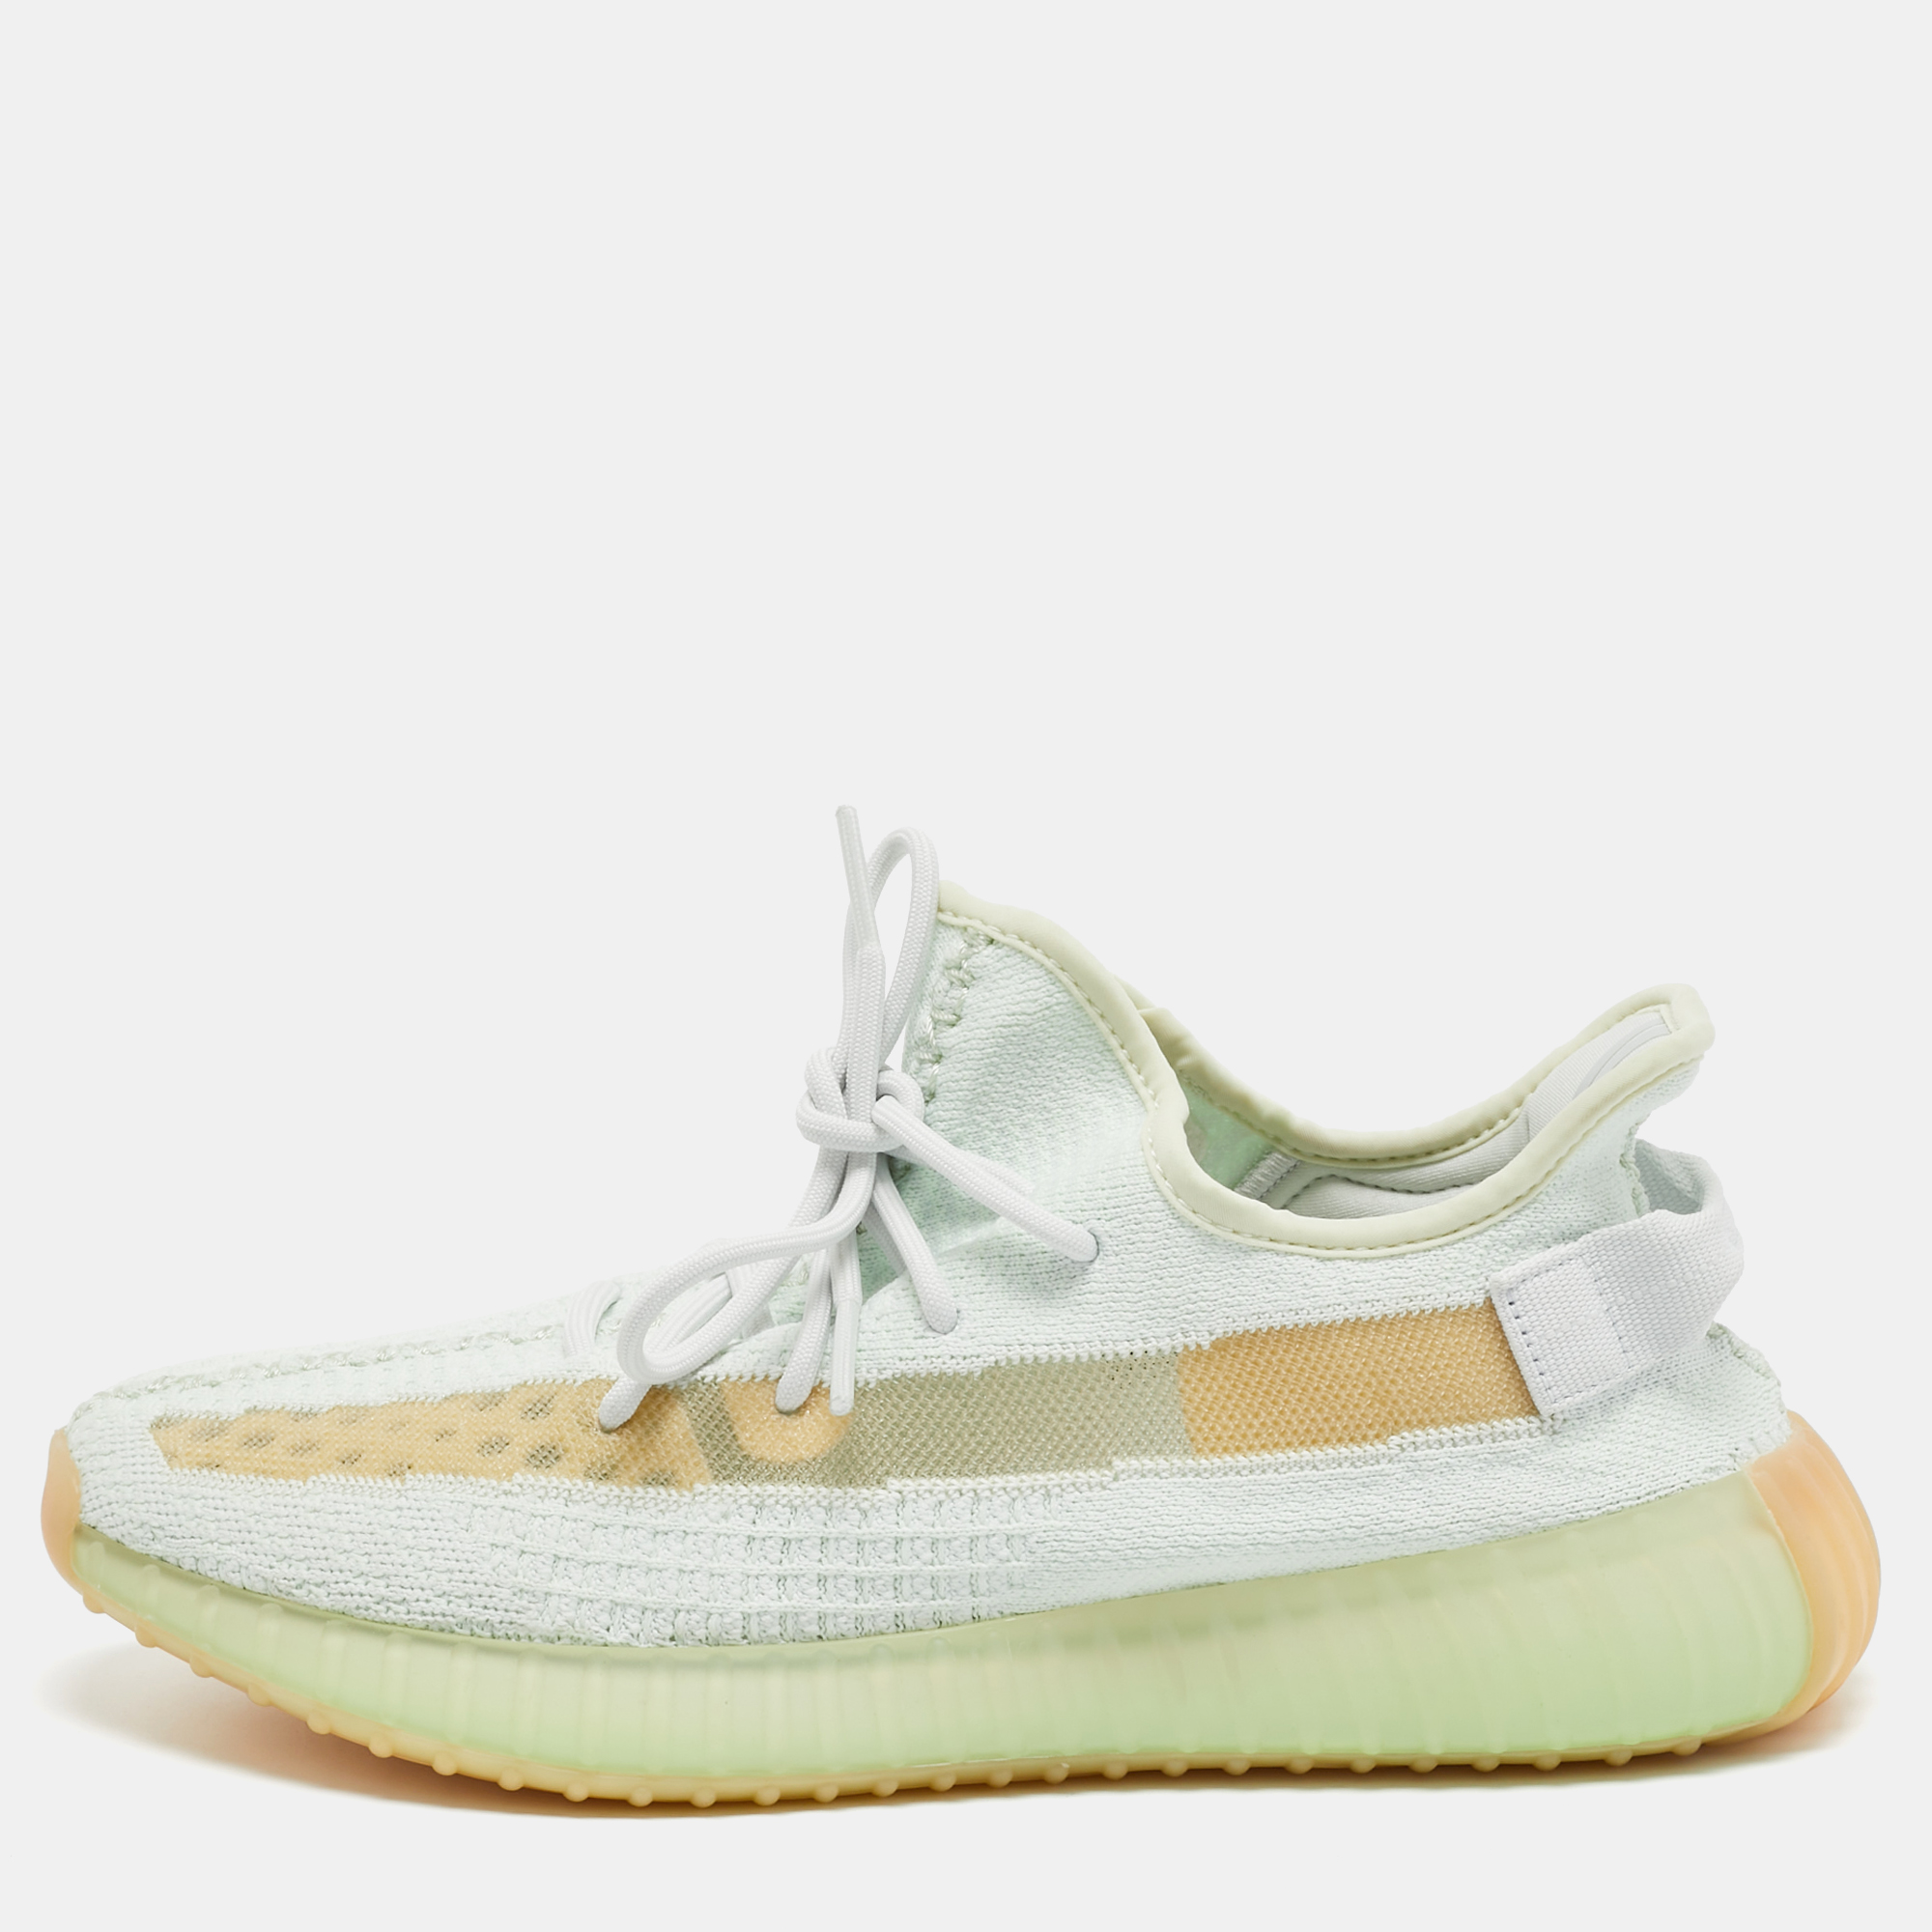 

Yeezy x Adidas Green Knit Fabric Boost 350 V2 "GID' Glow Sneakers Size 44 2/3, Blue